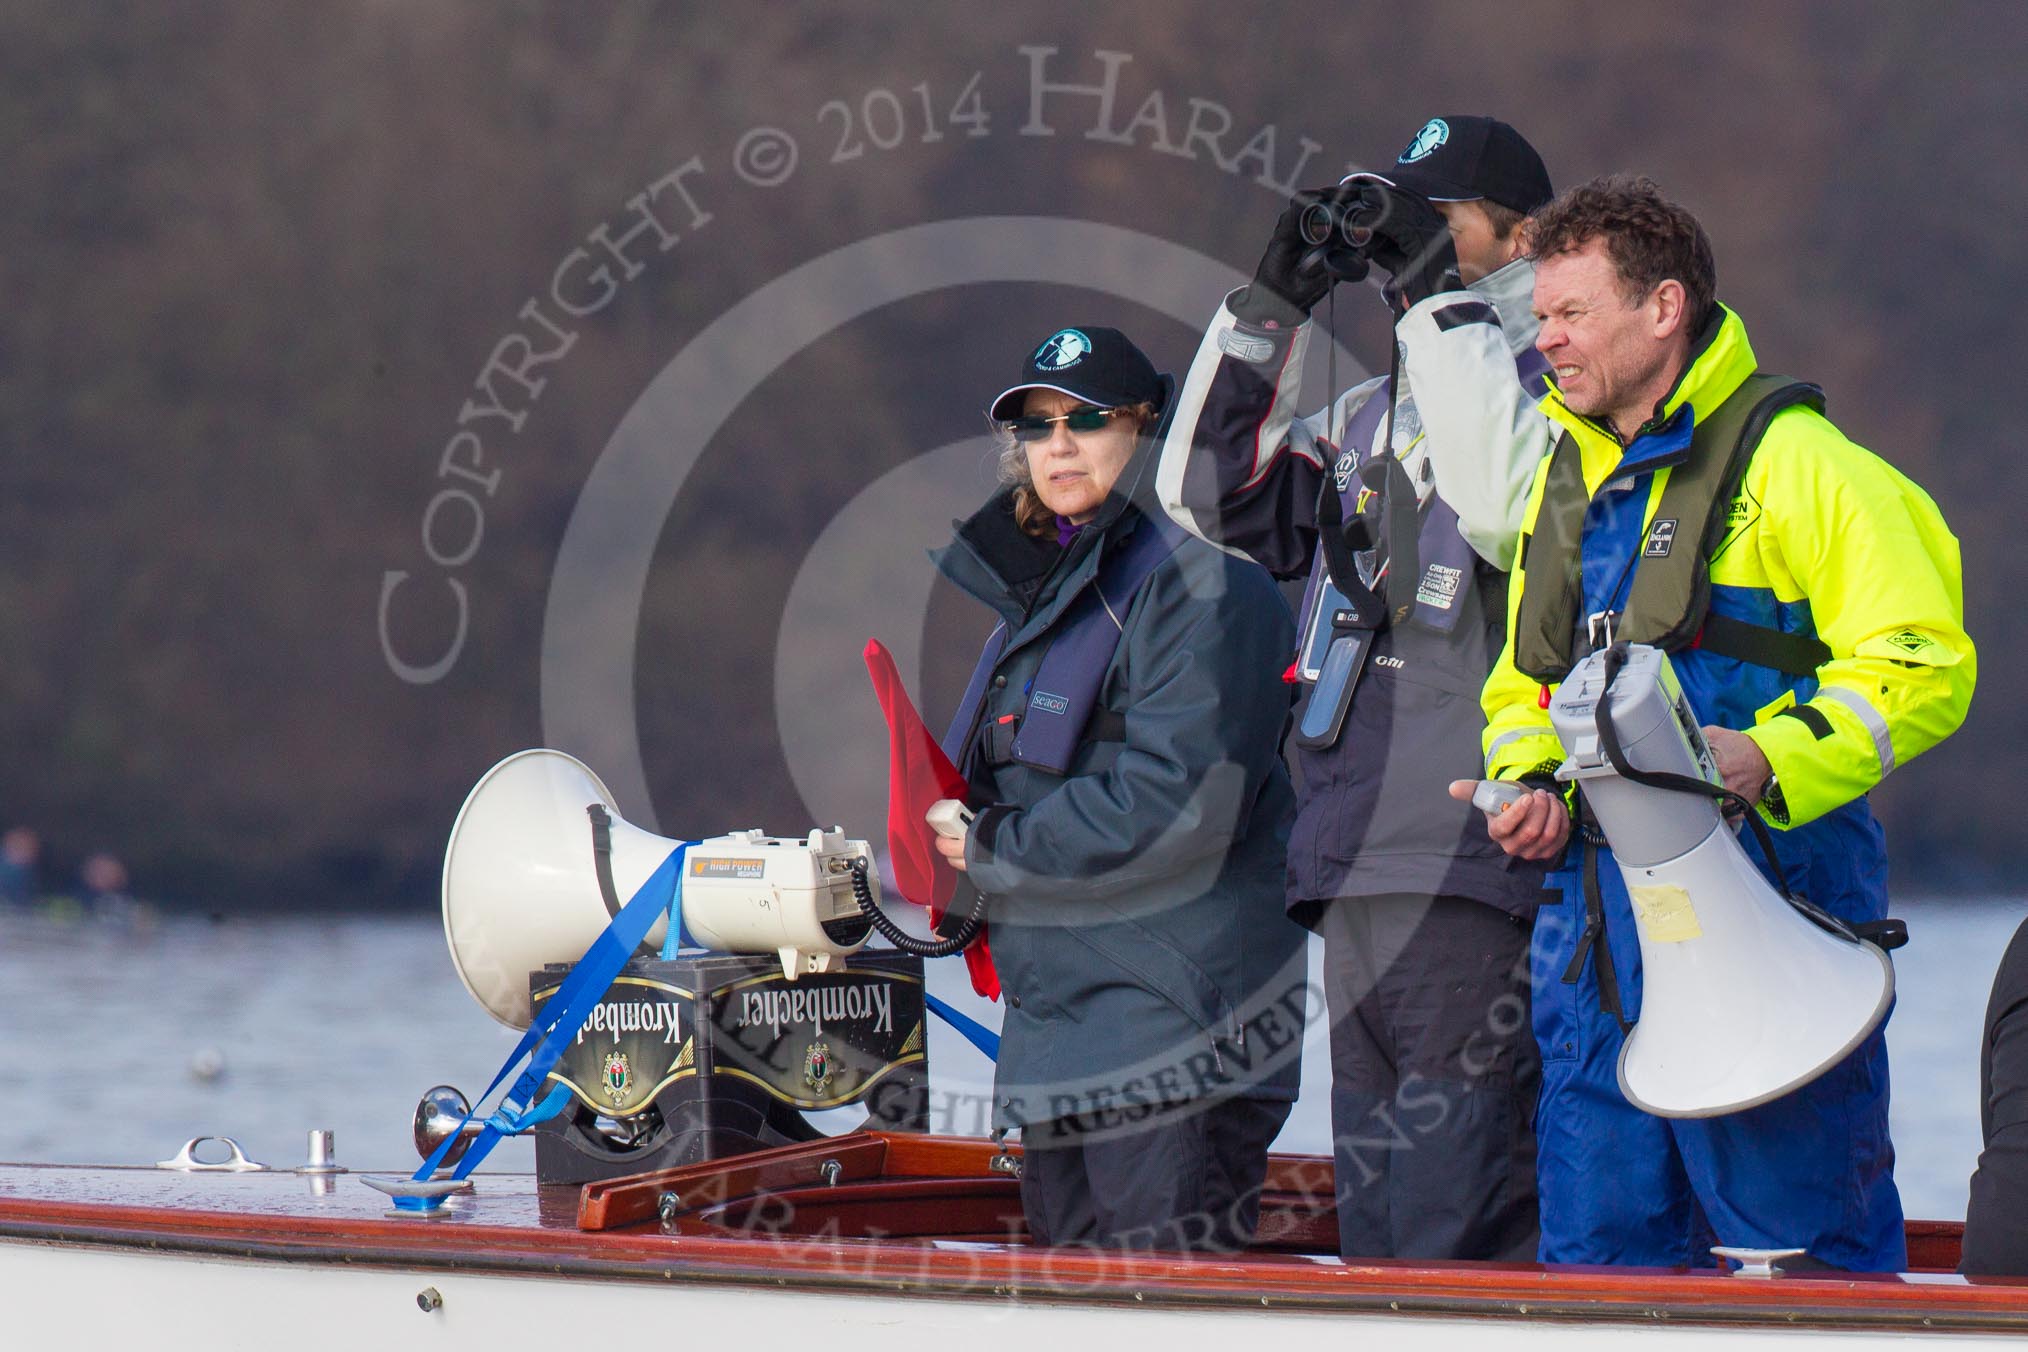 The Boat Race season 2014 - fixture OUWBC vs Molesey BC.




on 01 March 2014 at 12:52, image #107